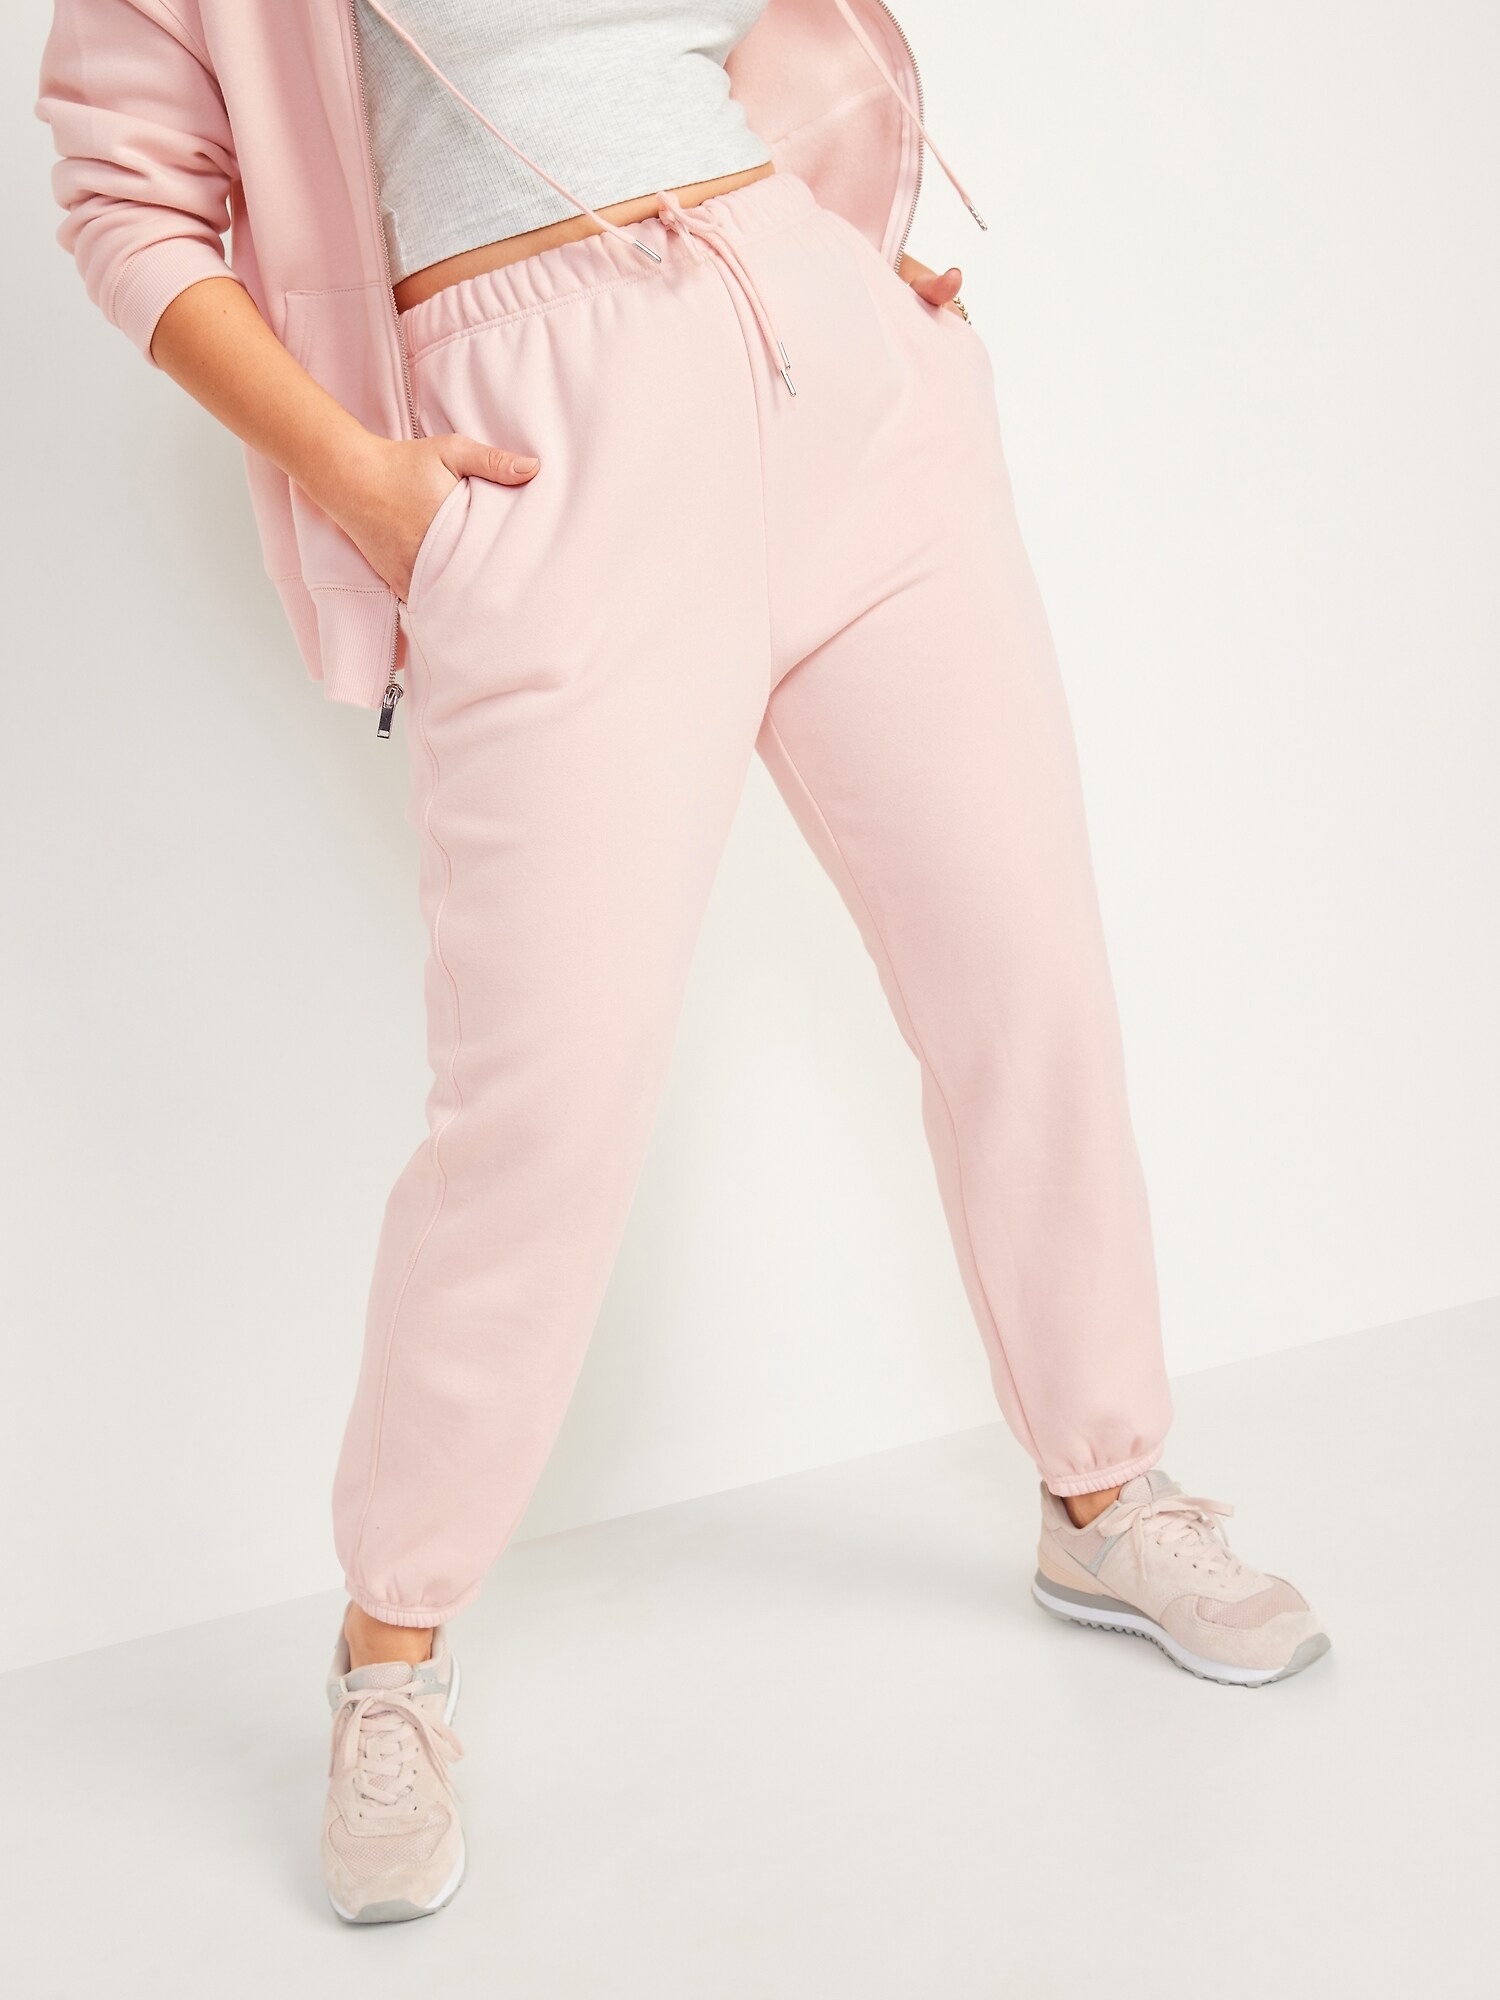 Extra High-Waisted Cropped French-Terry Classic Jogger Sweatpants for Women